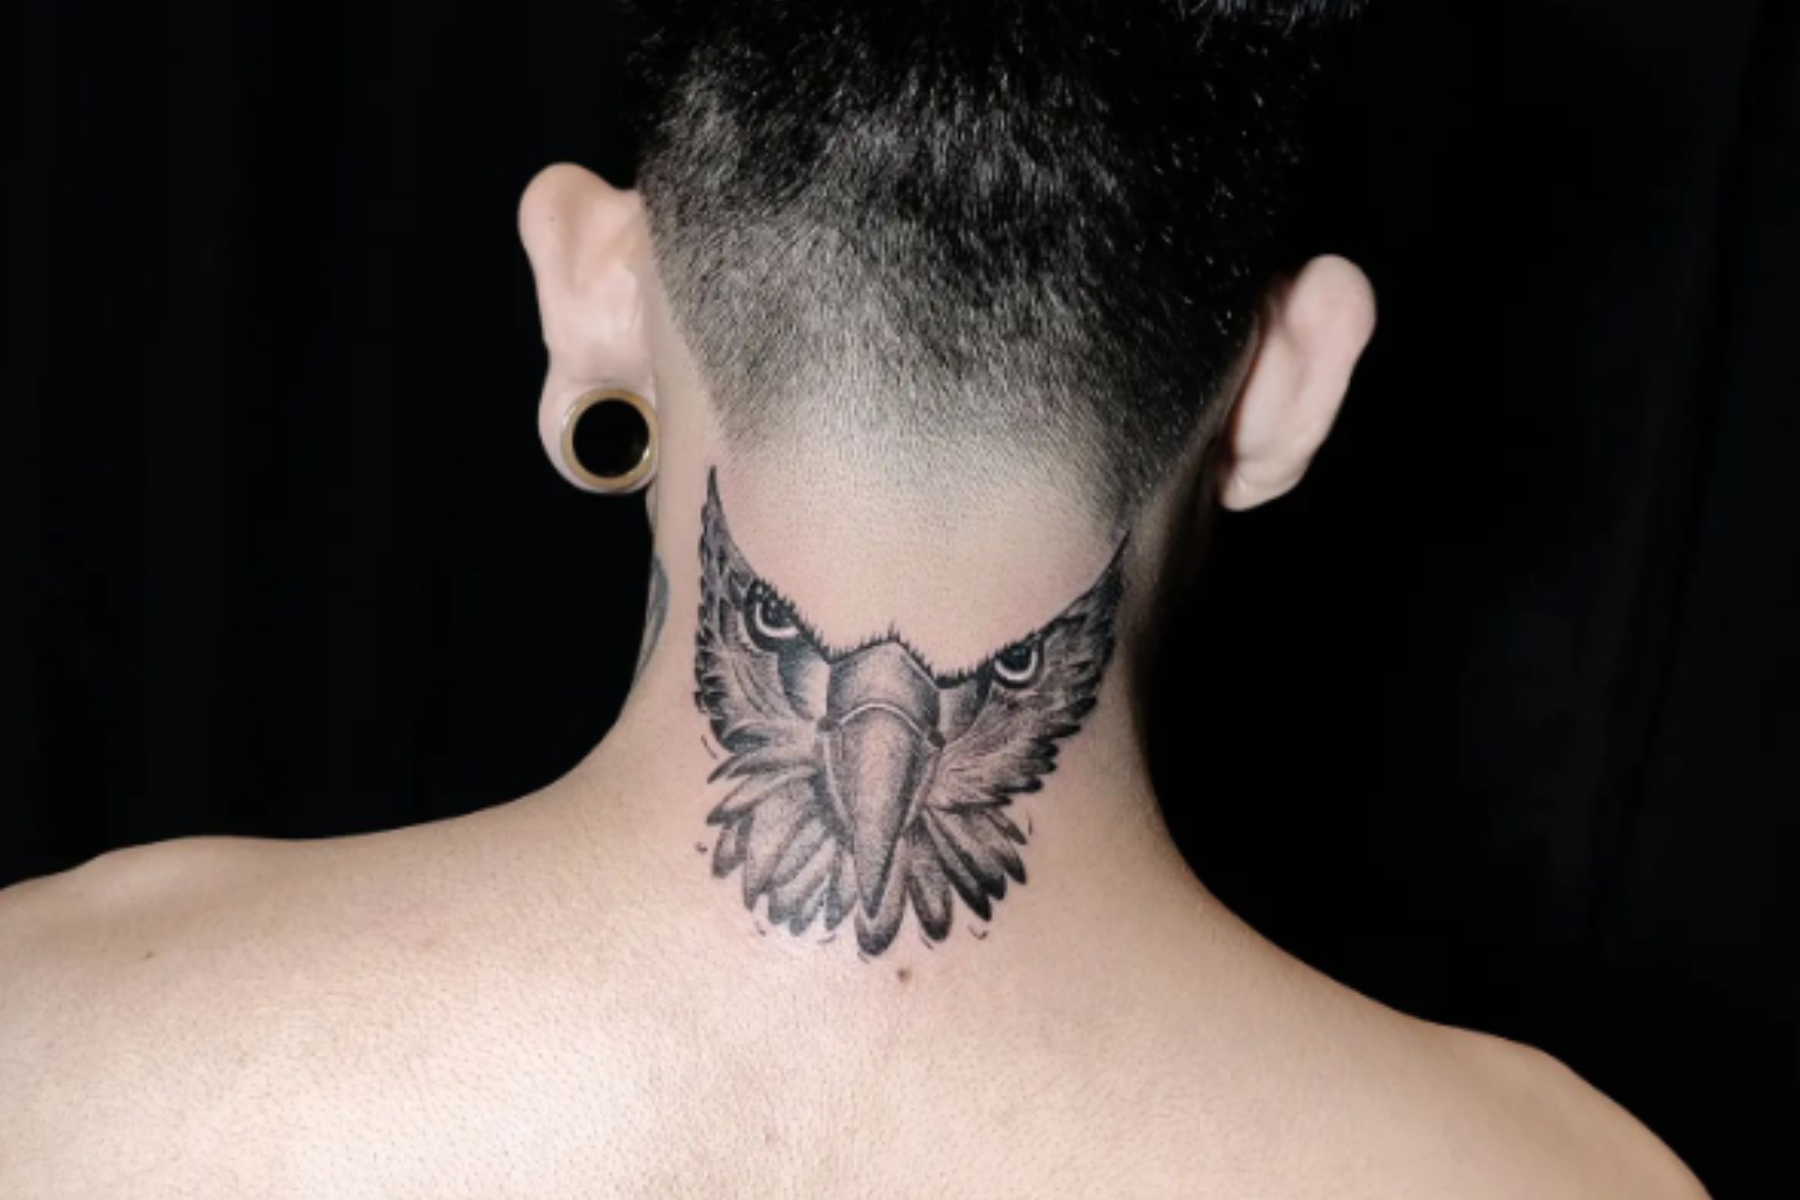 A white man is wearing a half-owl tattoo on the back of his neck